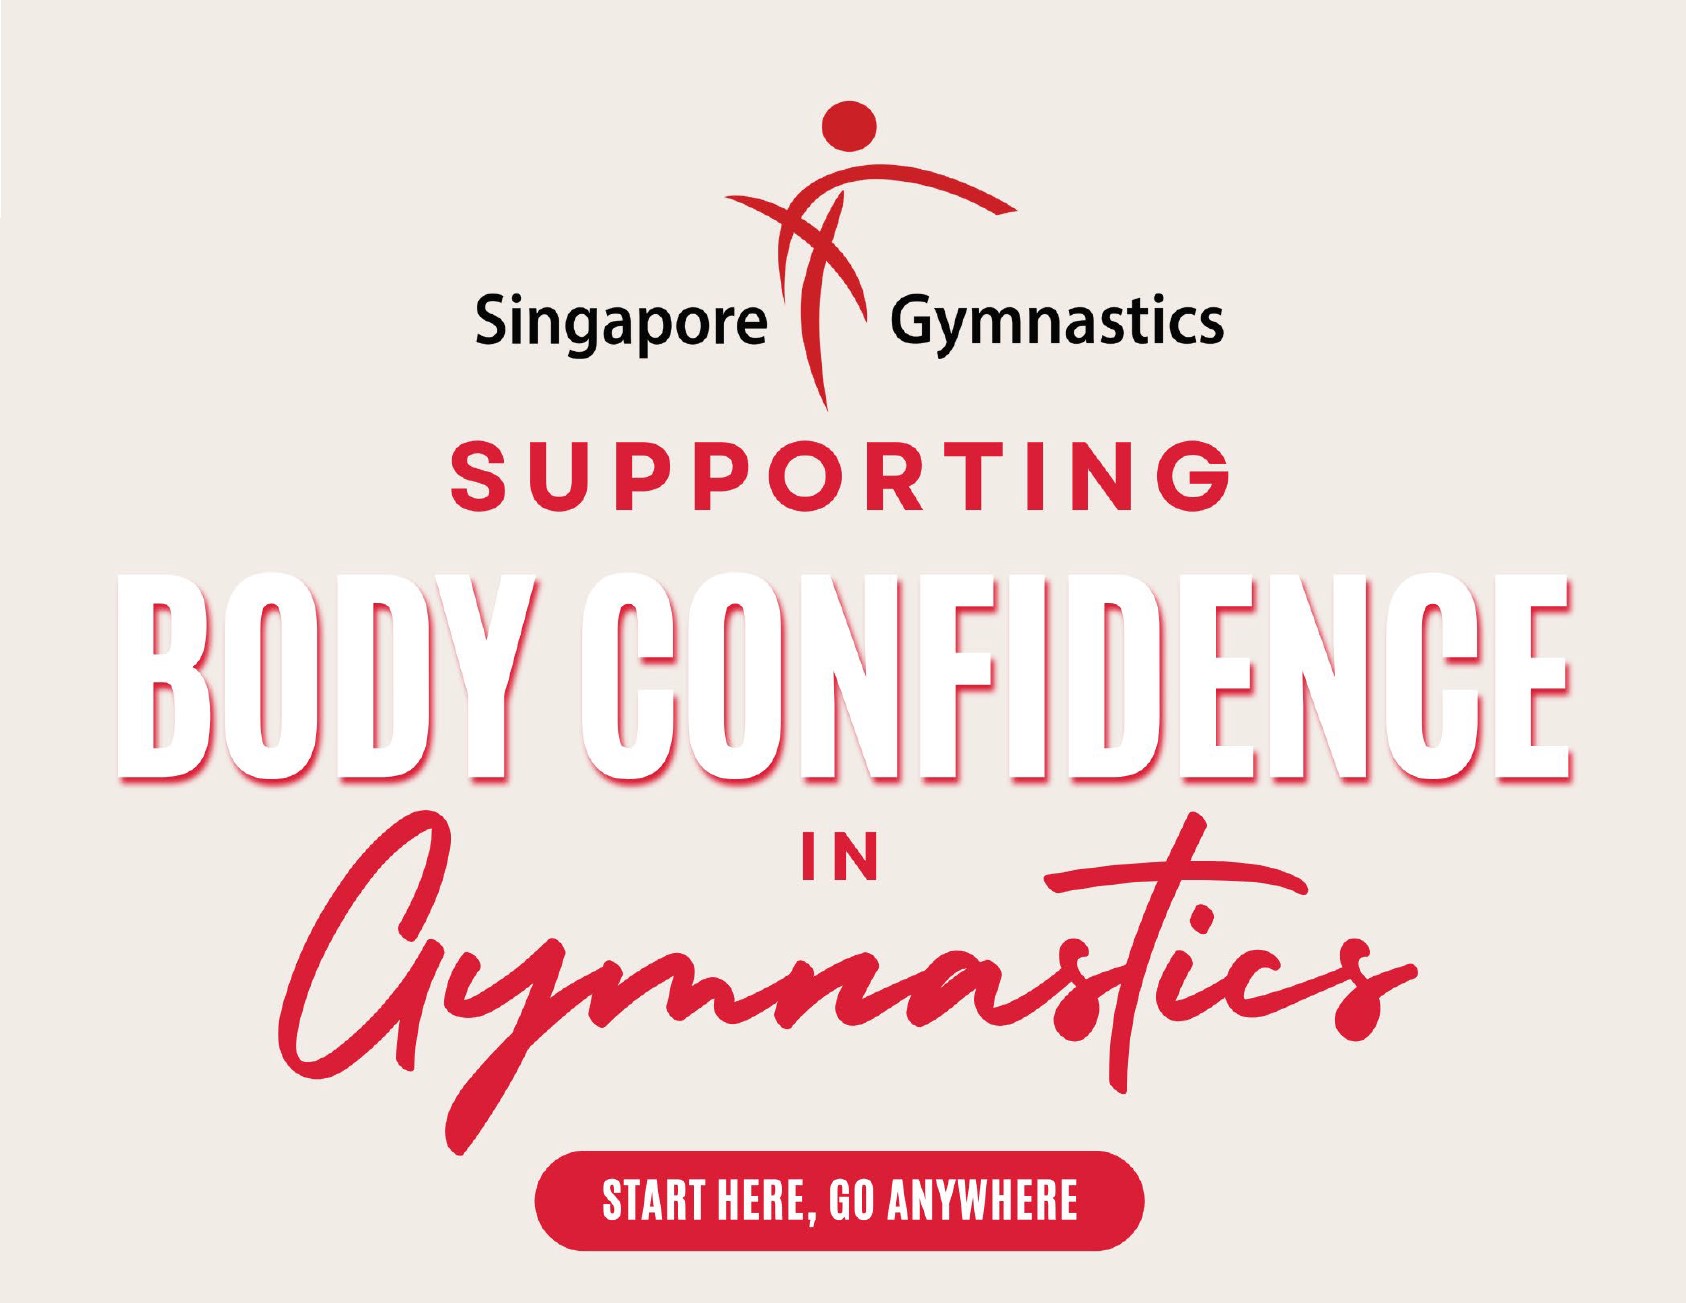 Singapore Gymnastics rolls out Body Confidence Guidelines, to help athletes feel comfortable and confident with themselves